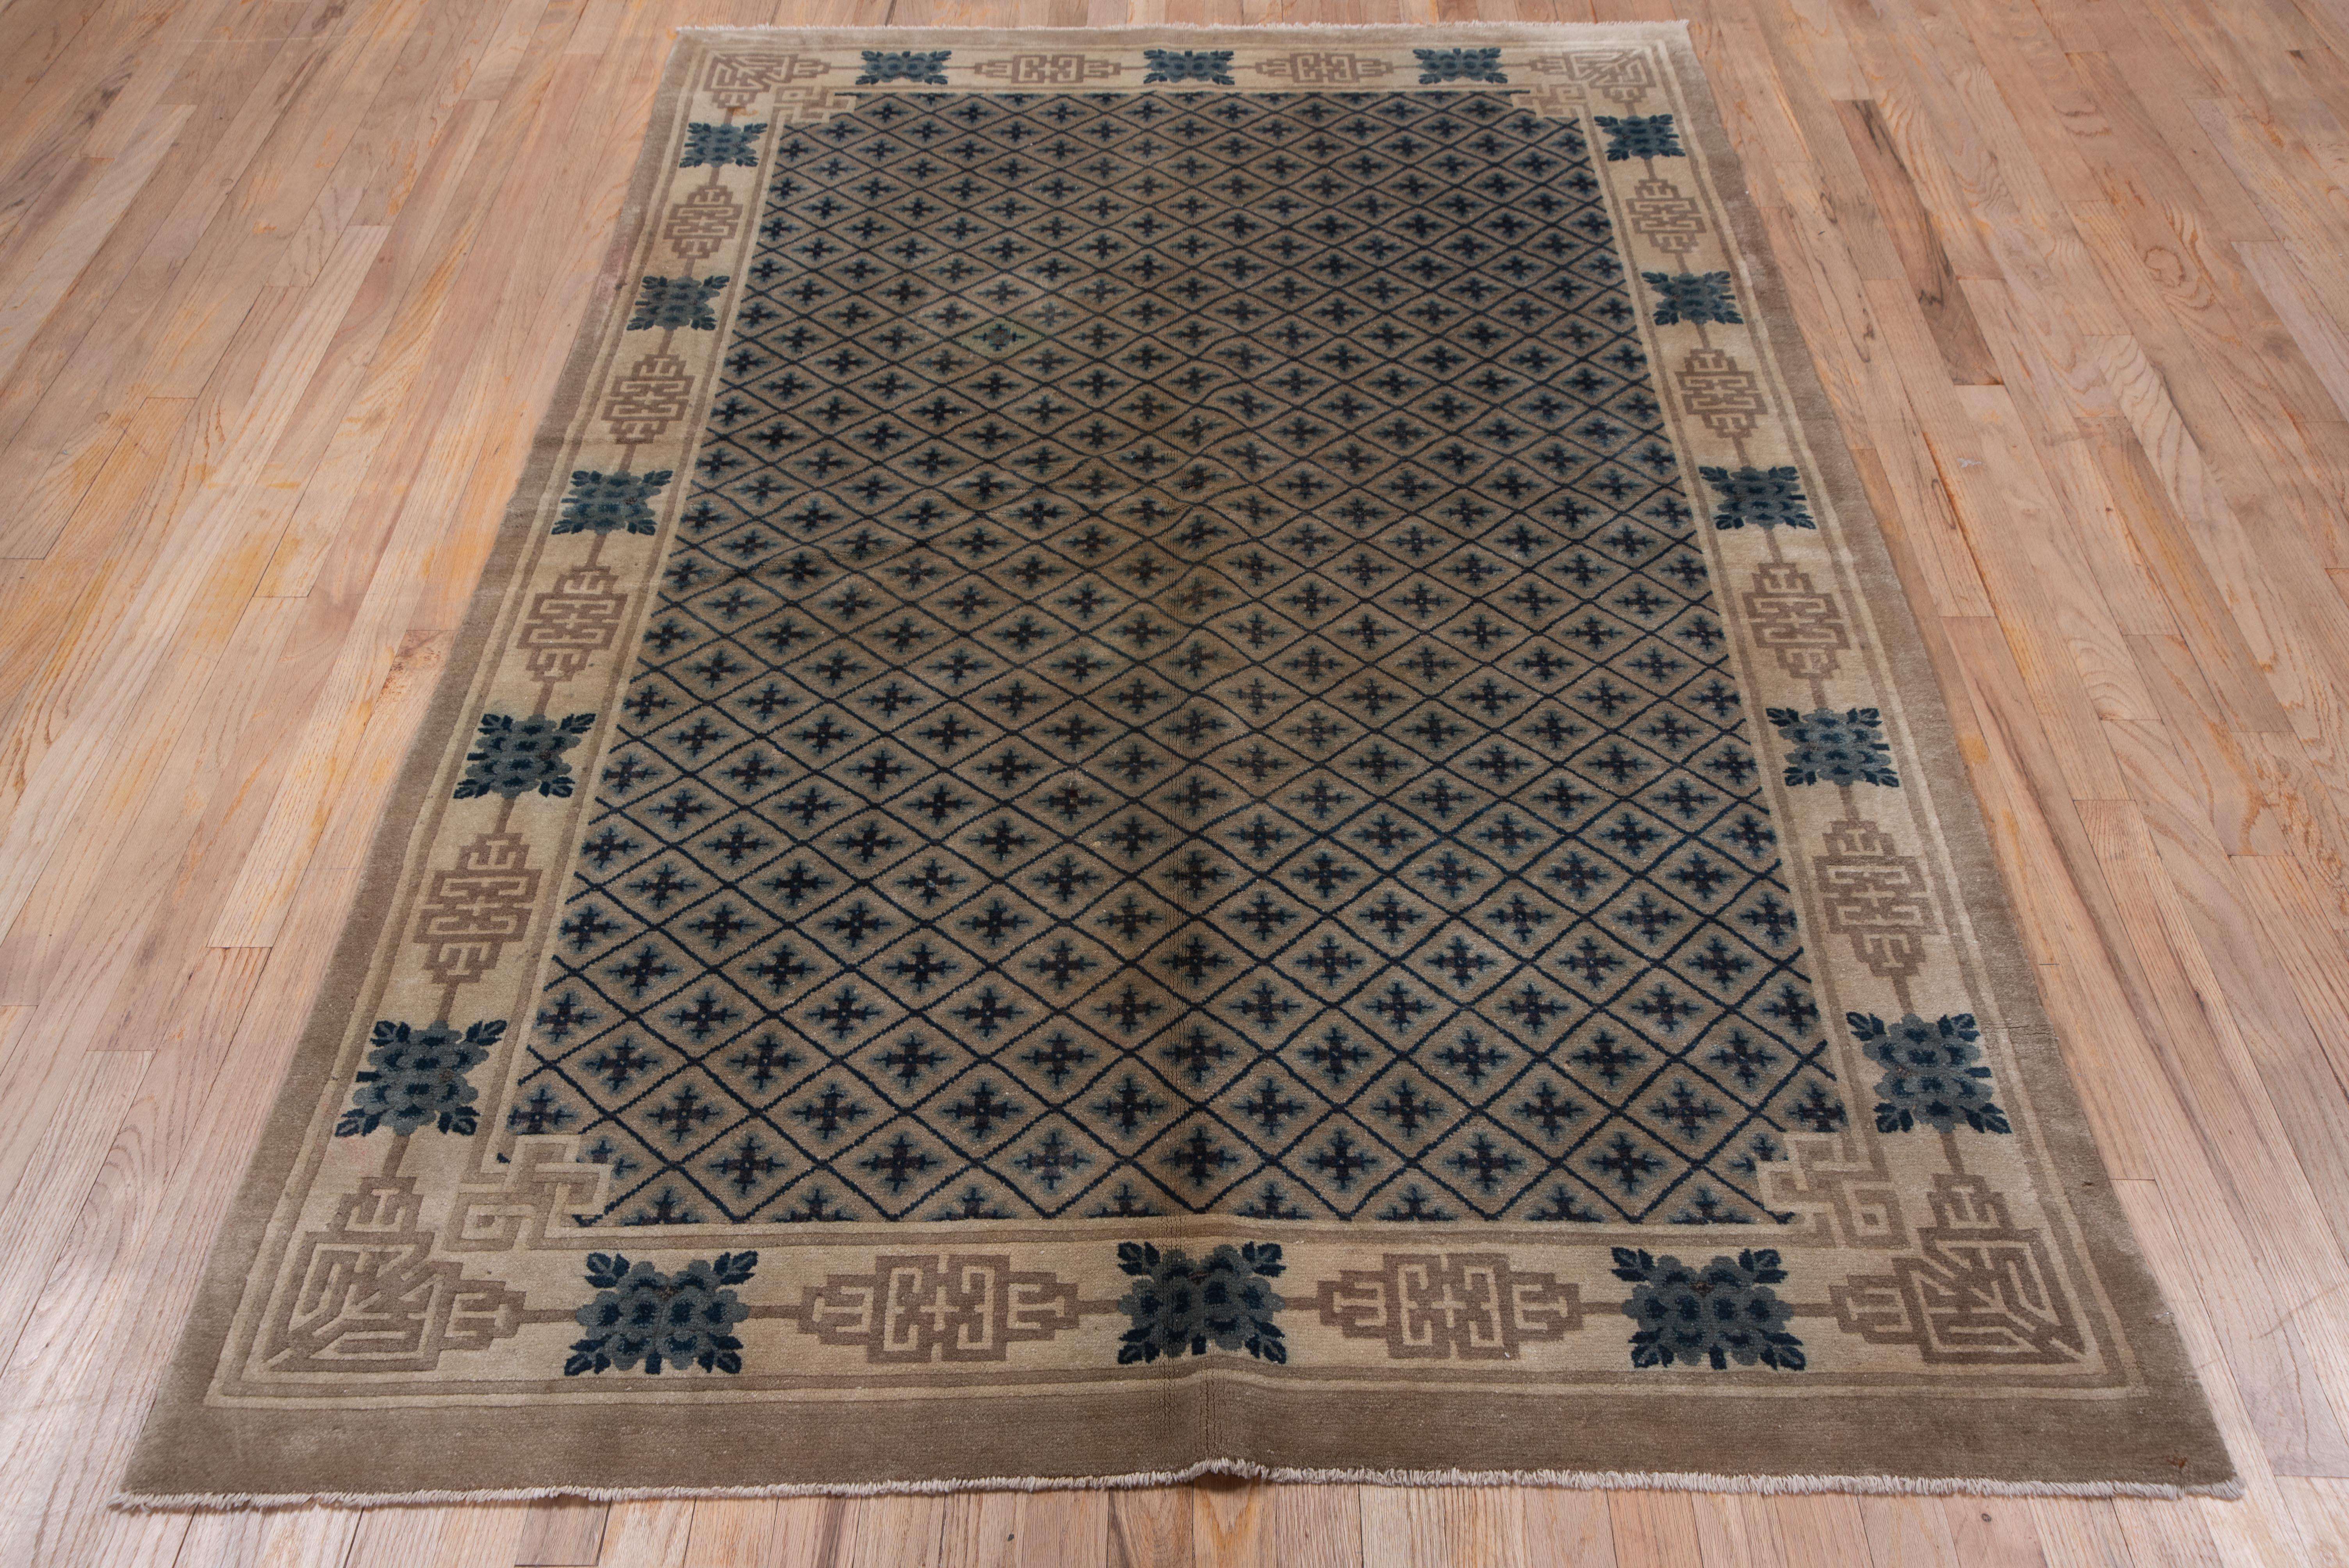 20th Century Antique Chinese Rug with Geometric Patterns Allover - Green Blue Khakis For Sale